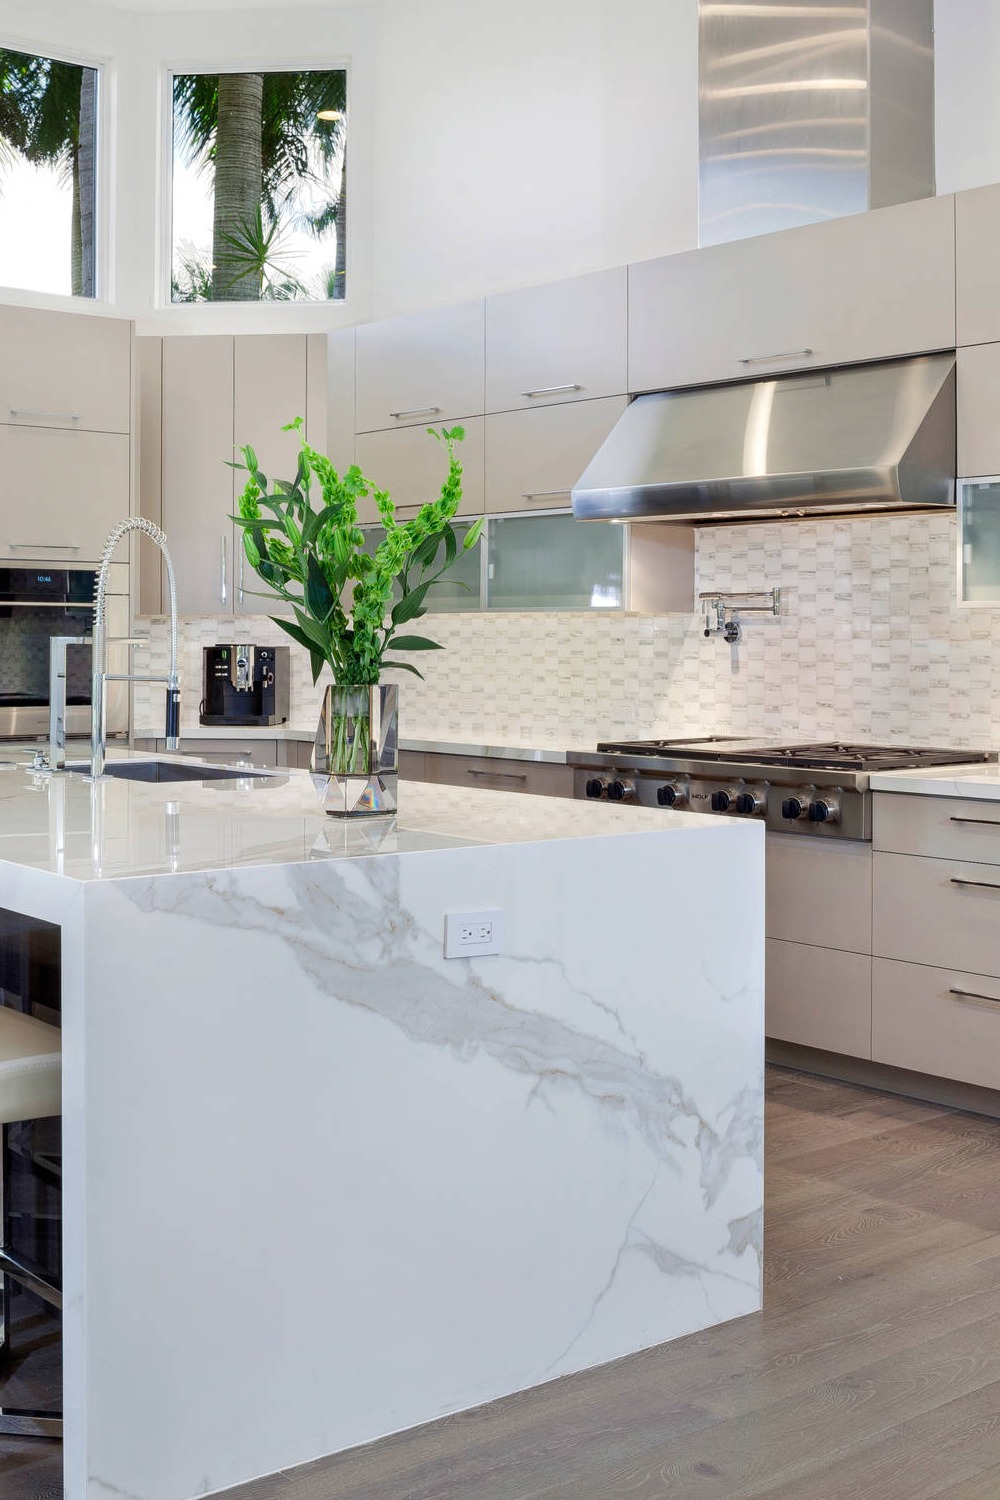 Highly Resistant Dekton Countertops Accelerated Version Large Format Slabs